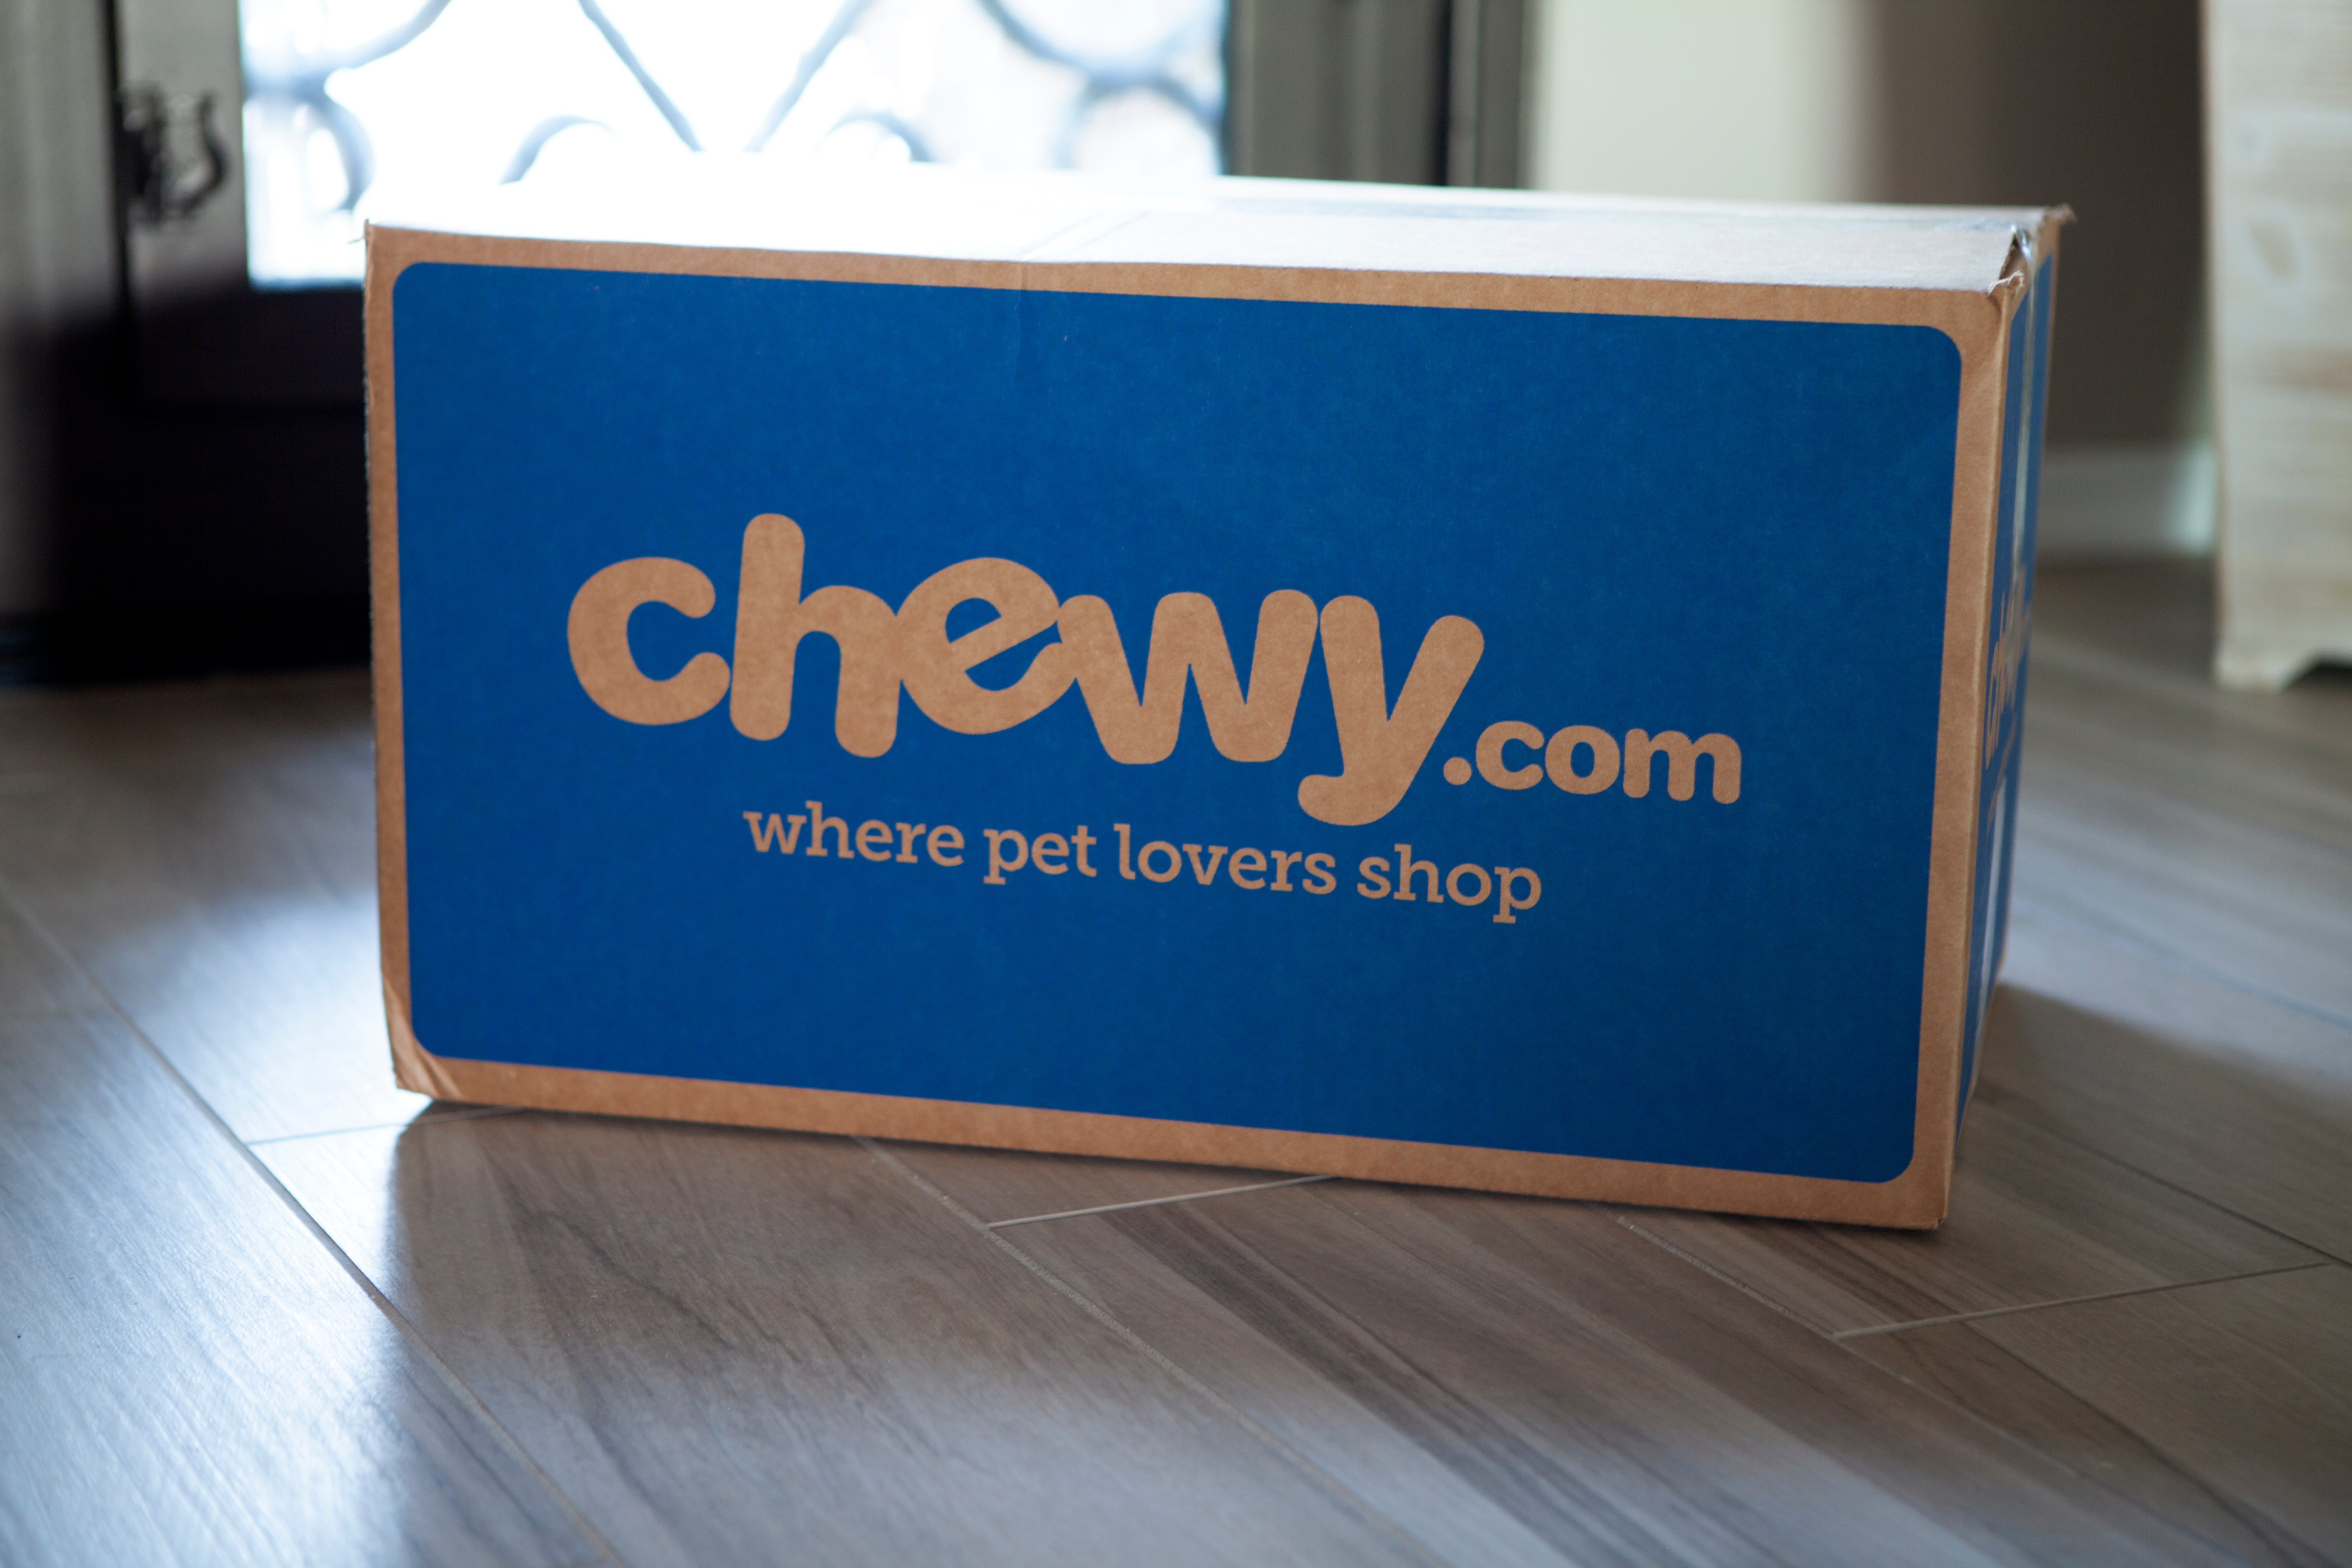 A delivery box from Chewy.